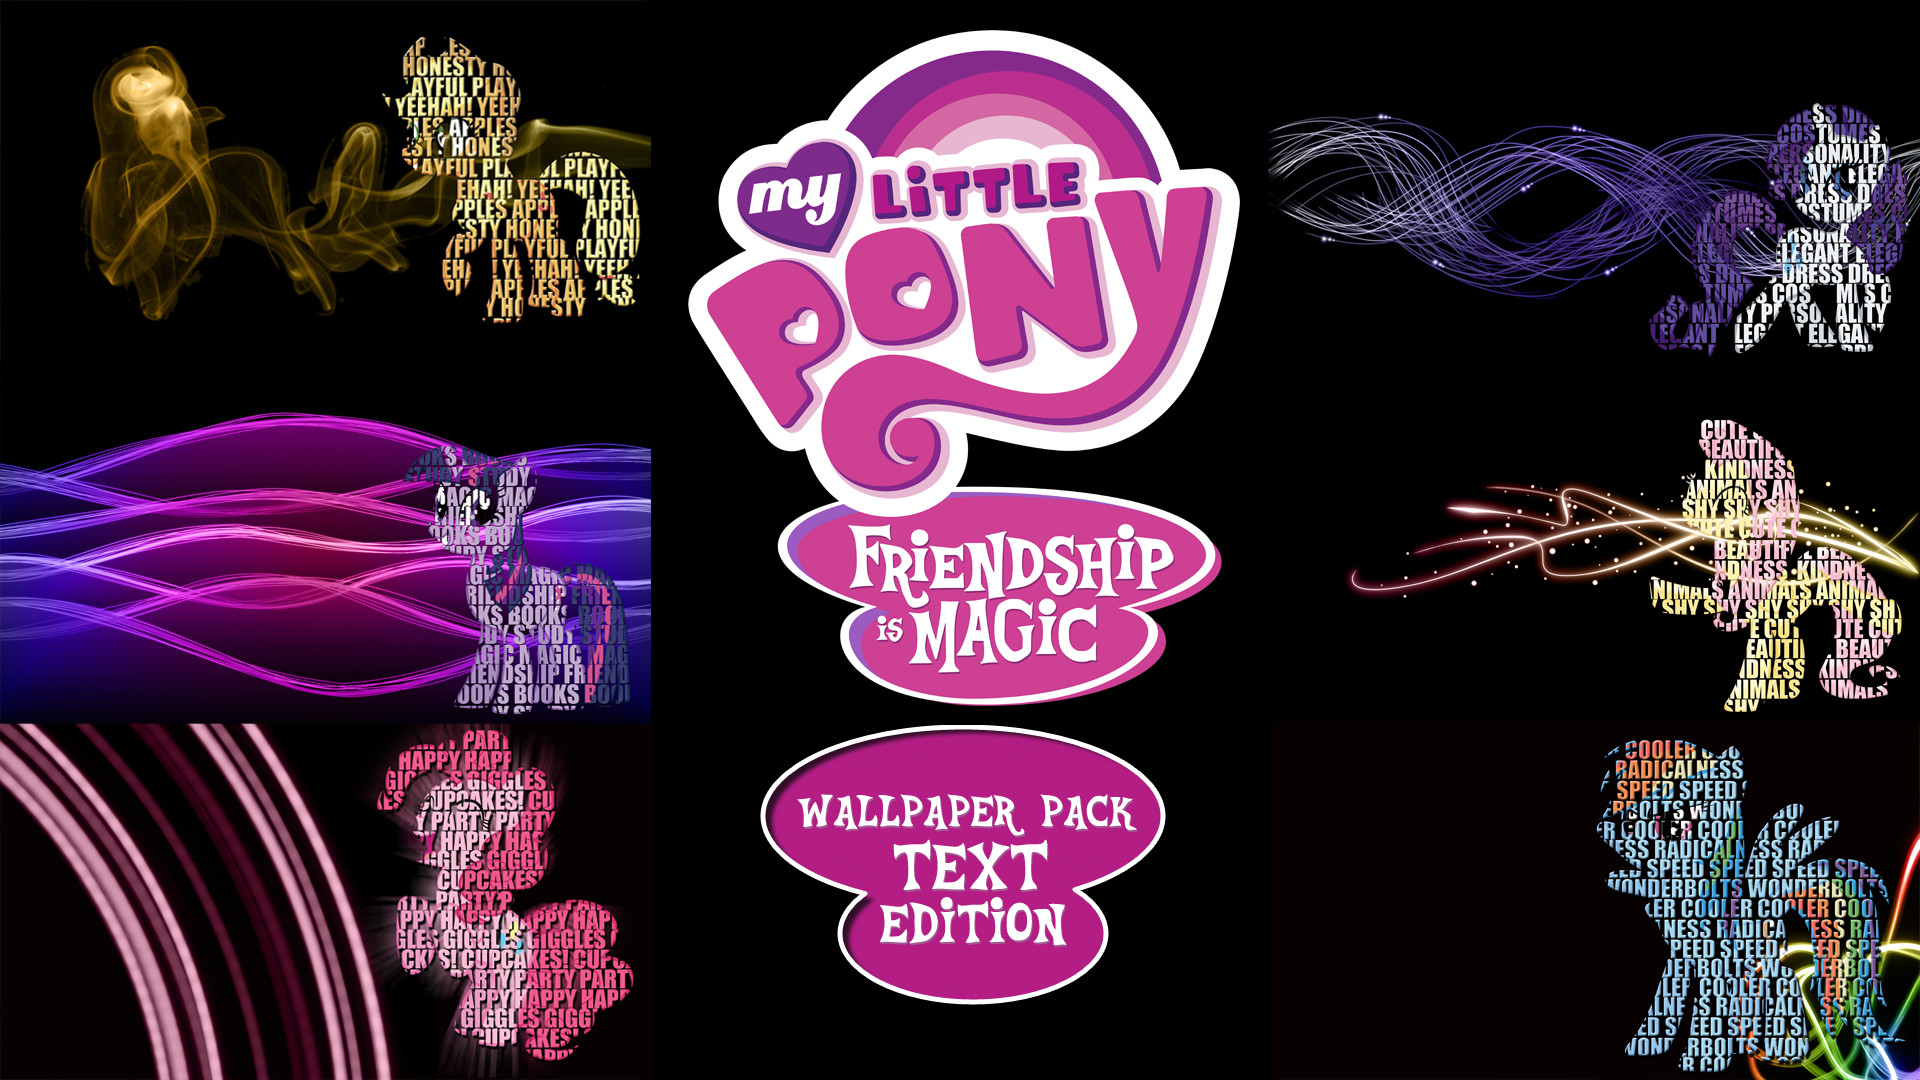 1920x1080 ... My Little Pony FIM Wallpaper Pack Text Edition by BlueDragonHans